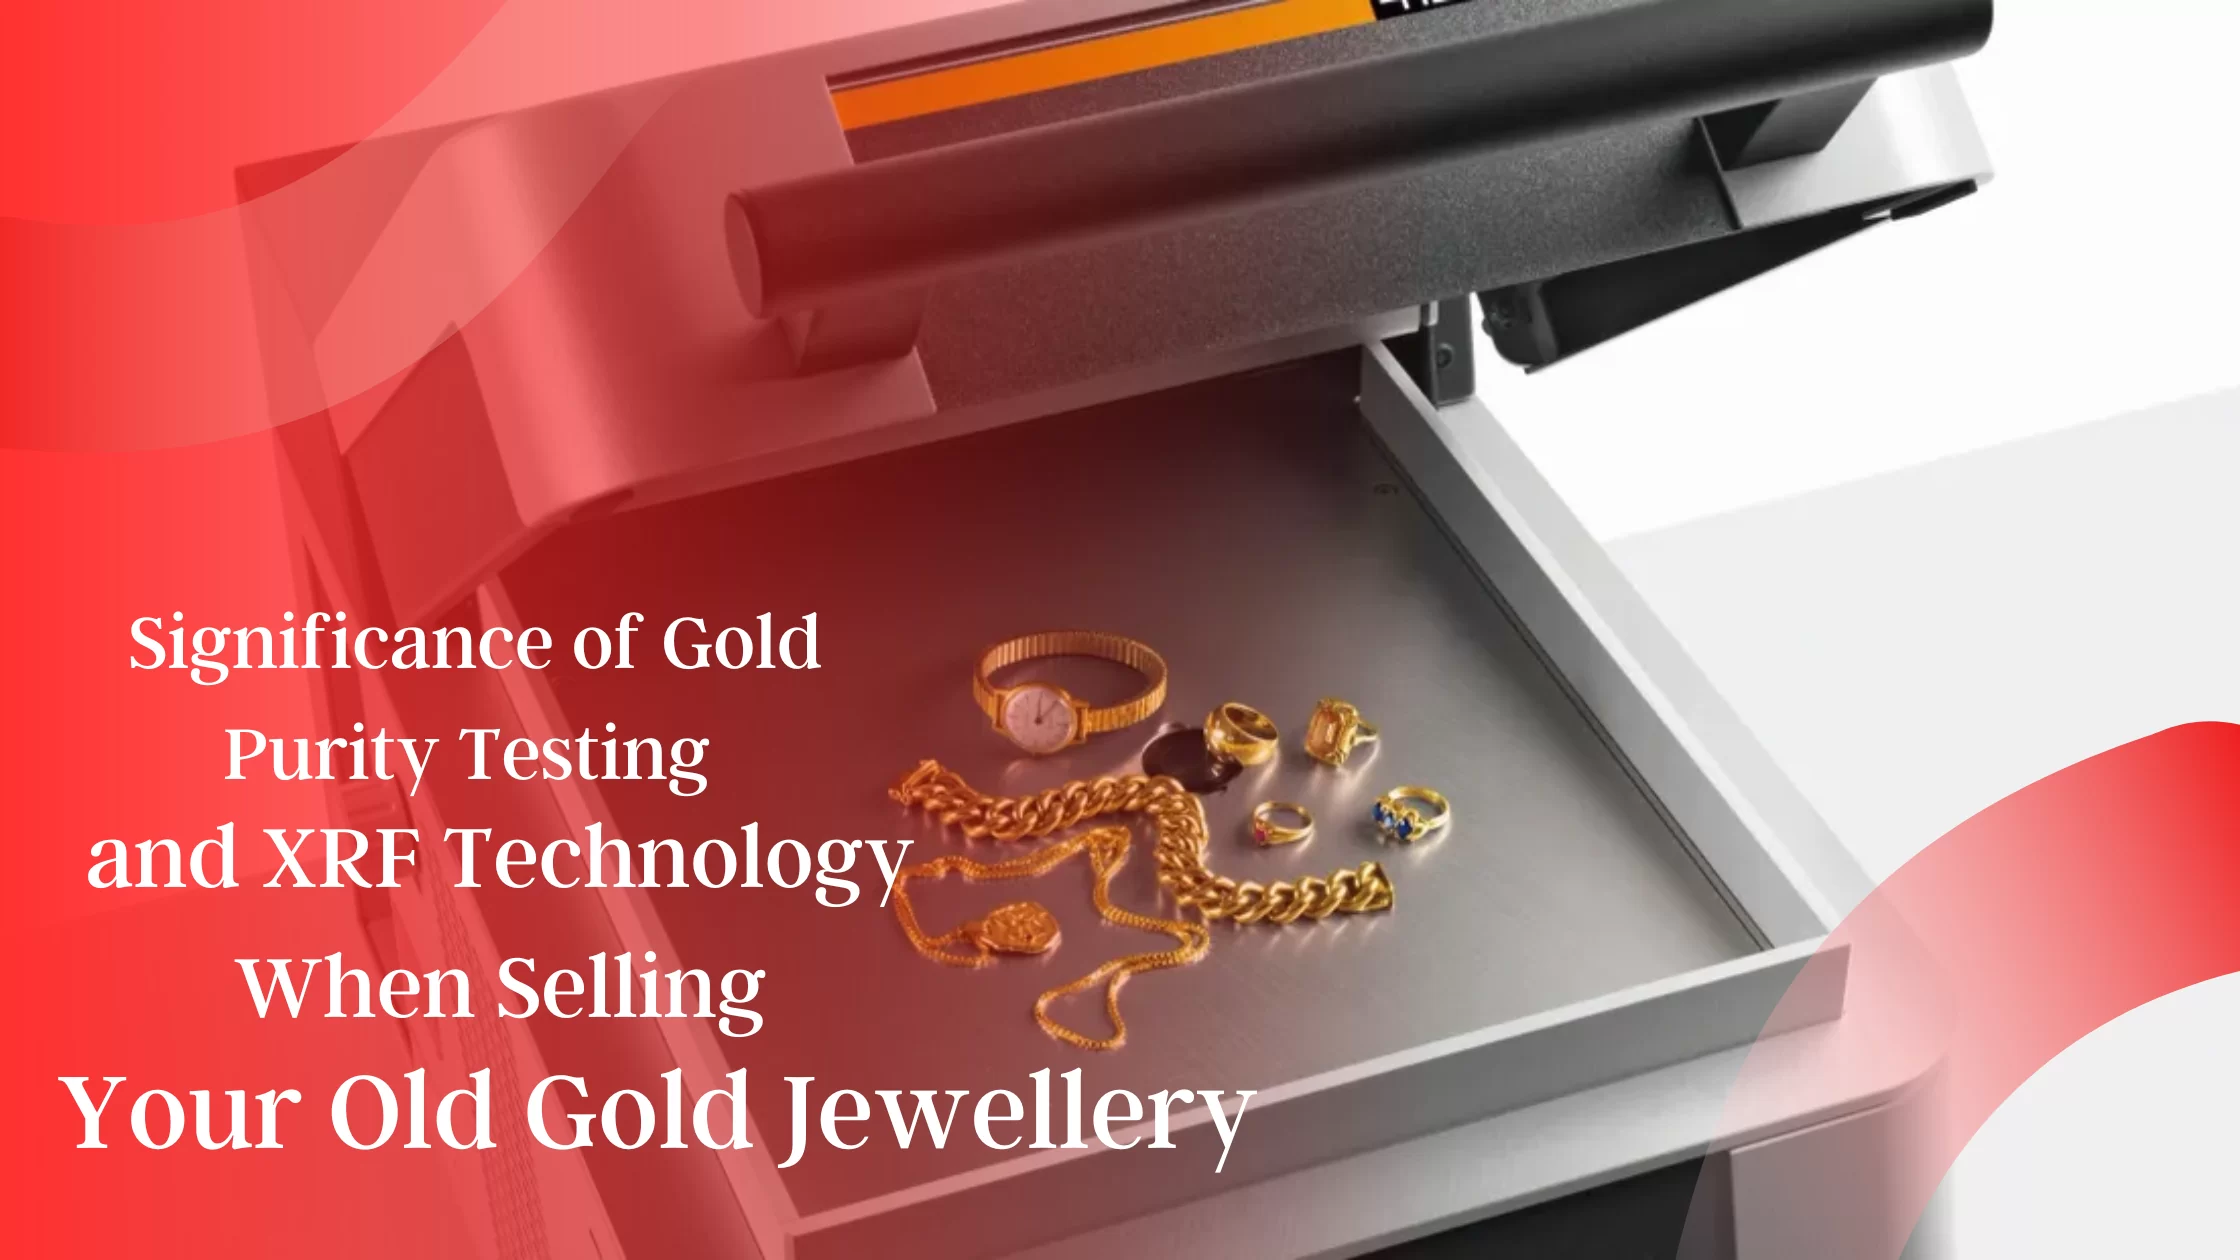 Significance of Gold Purity Testing and XRF Technology When Selling Your Old Gold Jewellery